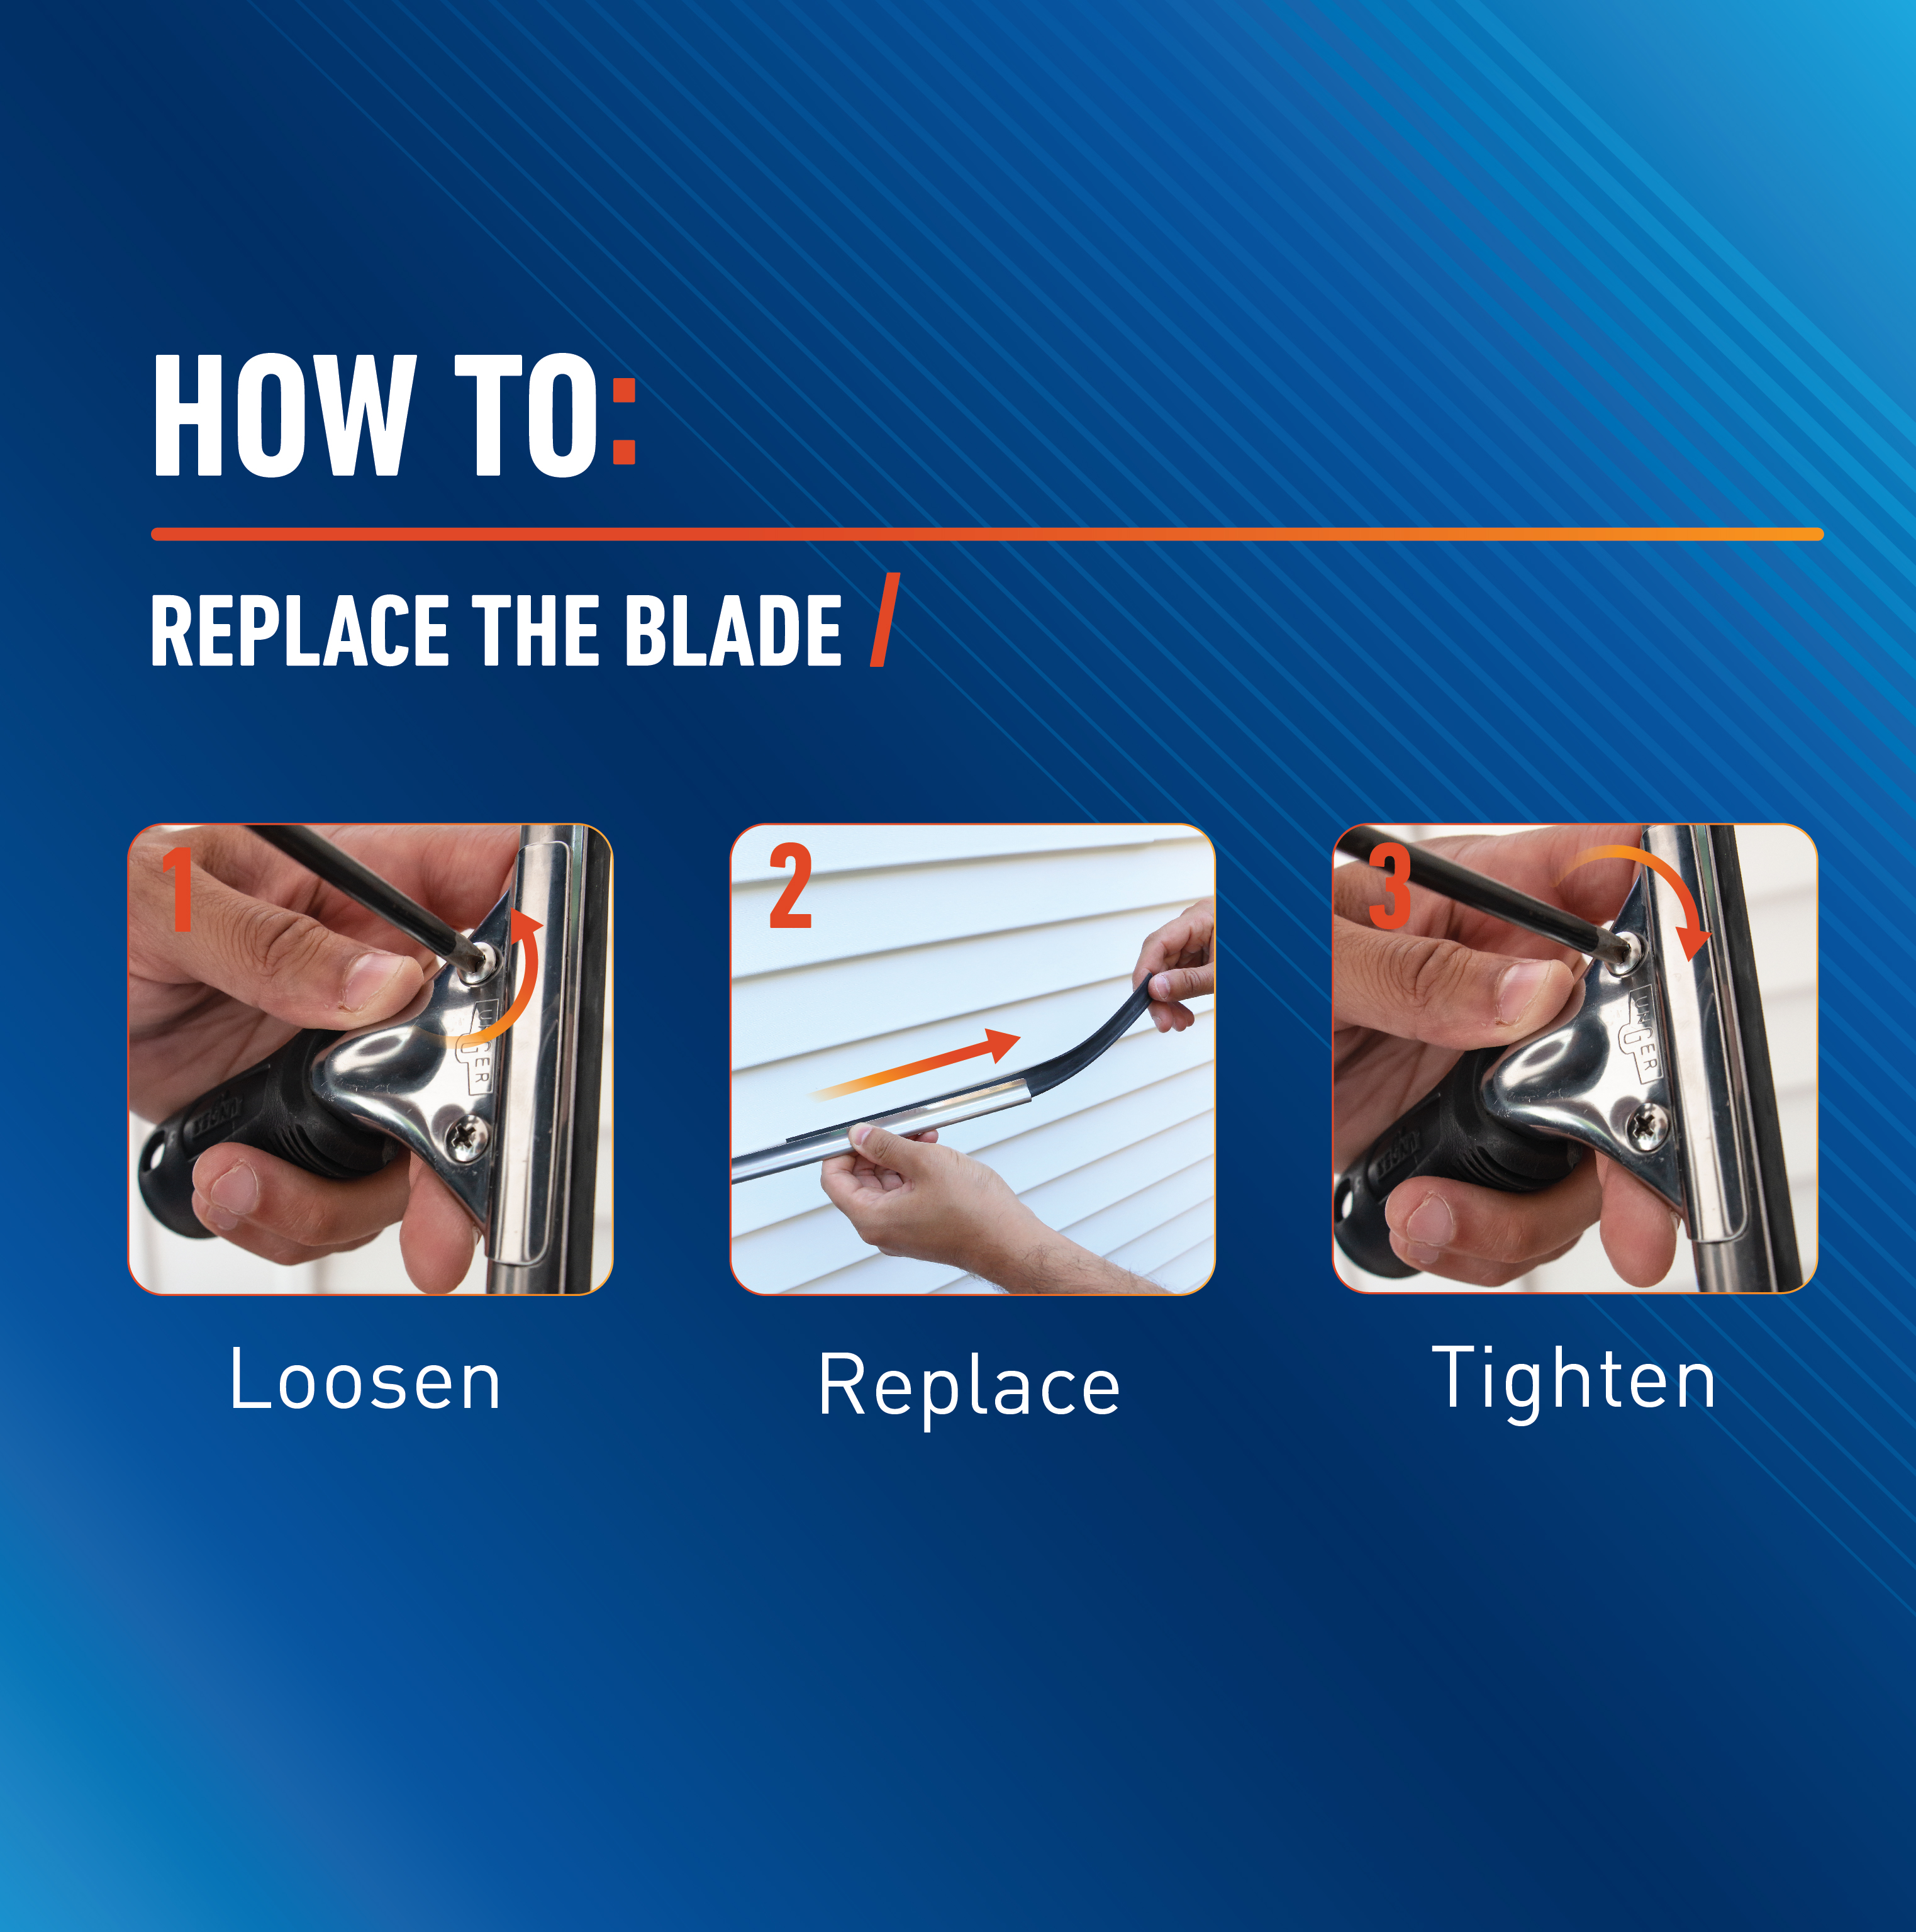 981020_UI_Unger Pro_16 inch Performance Grip Squeegee_Infographic How To